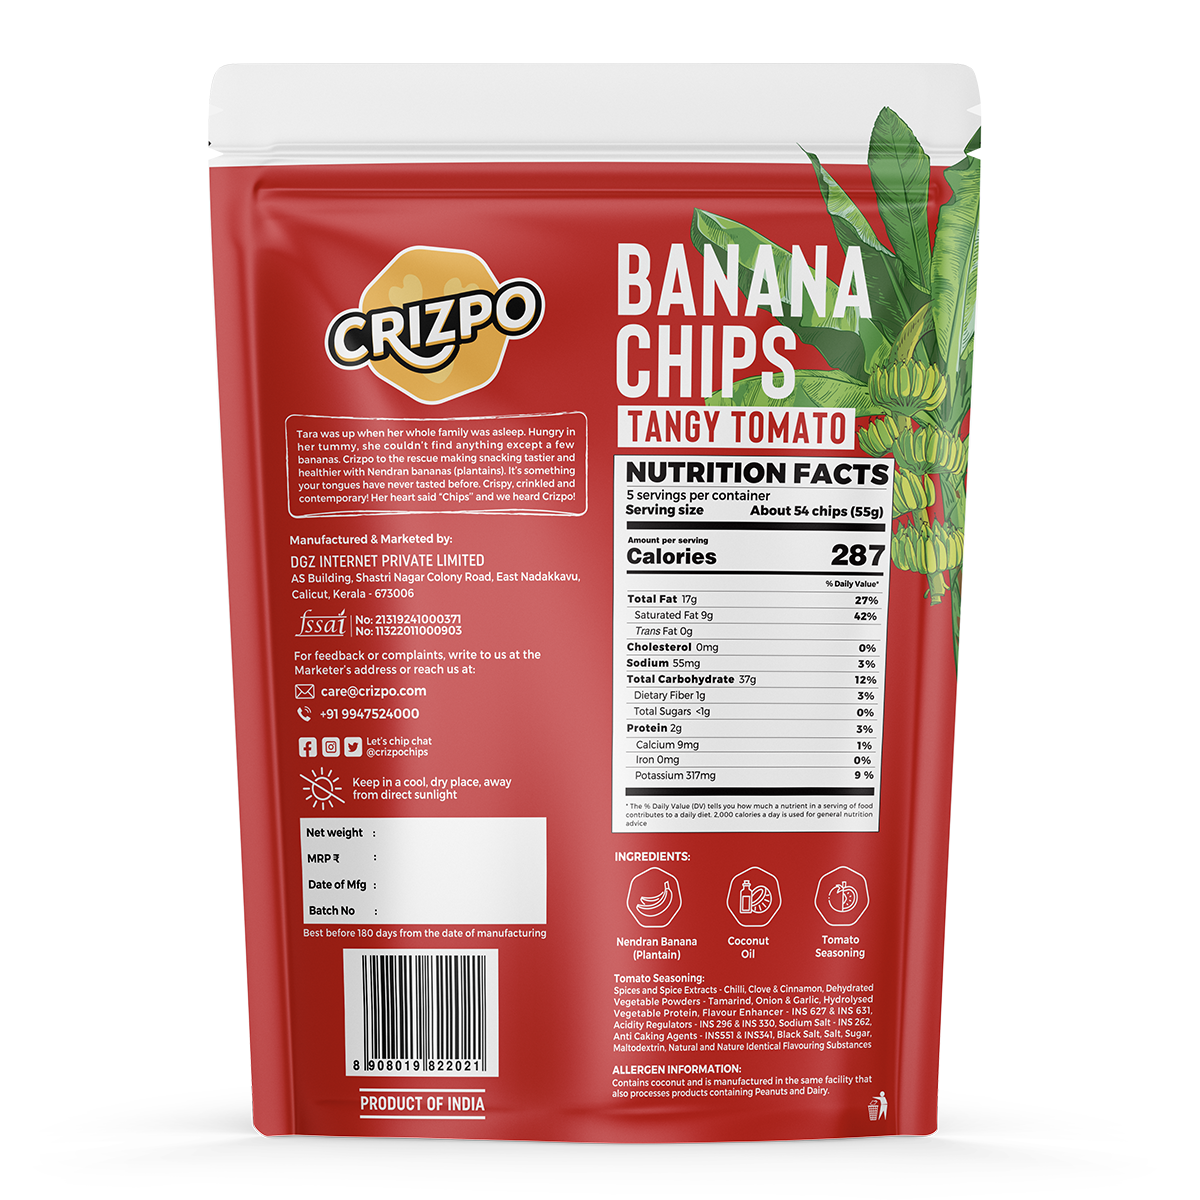 Crizpo Banana Chips - Tangy Tomato - Pack of 3 x 110g